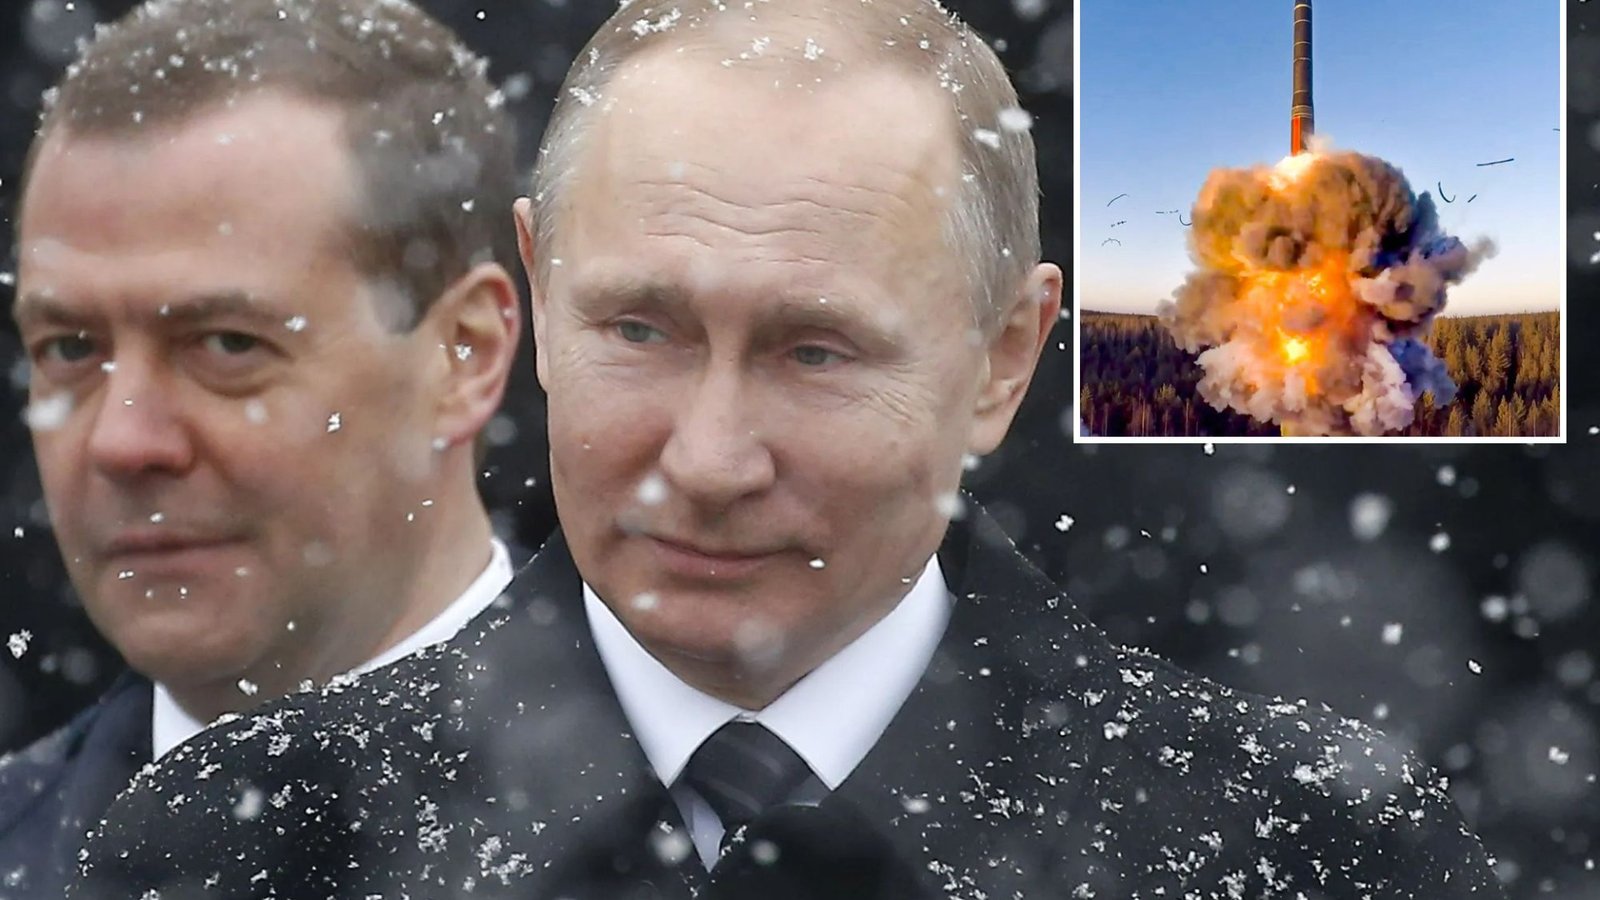 Putins top crony Dmitry Medvedev vows Russia will wipe its enemies off the face of the Earth in chilling WW3 threat